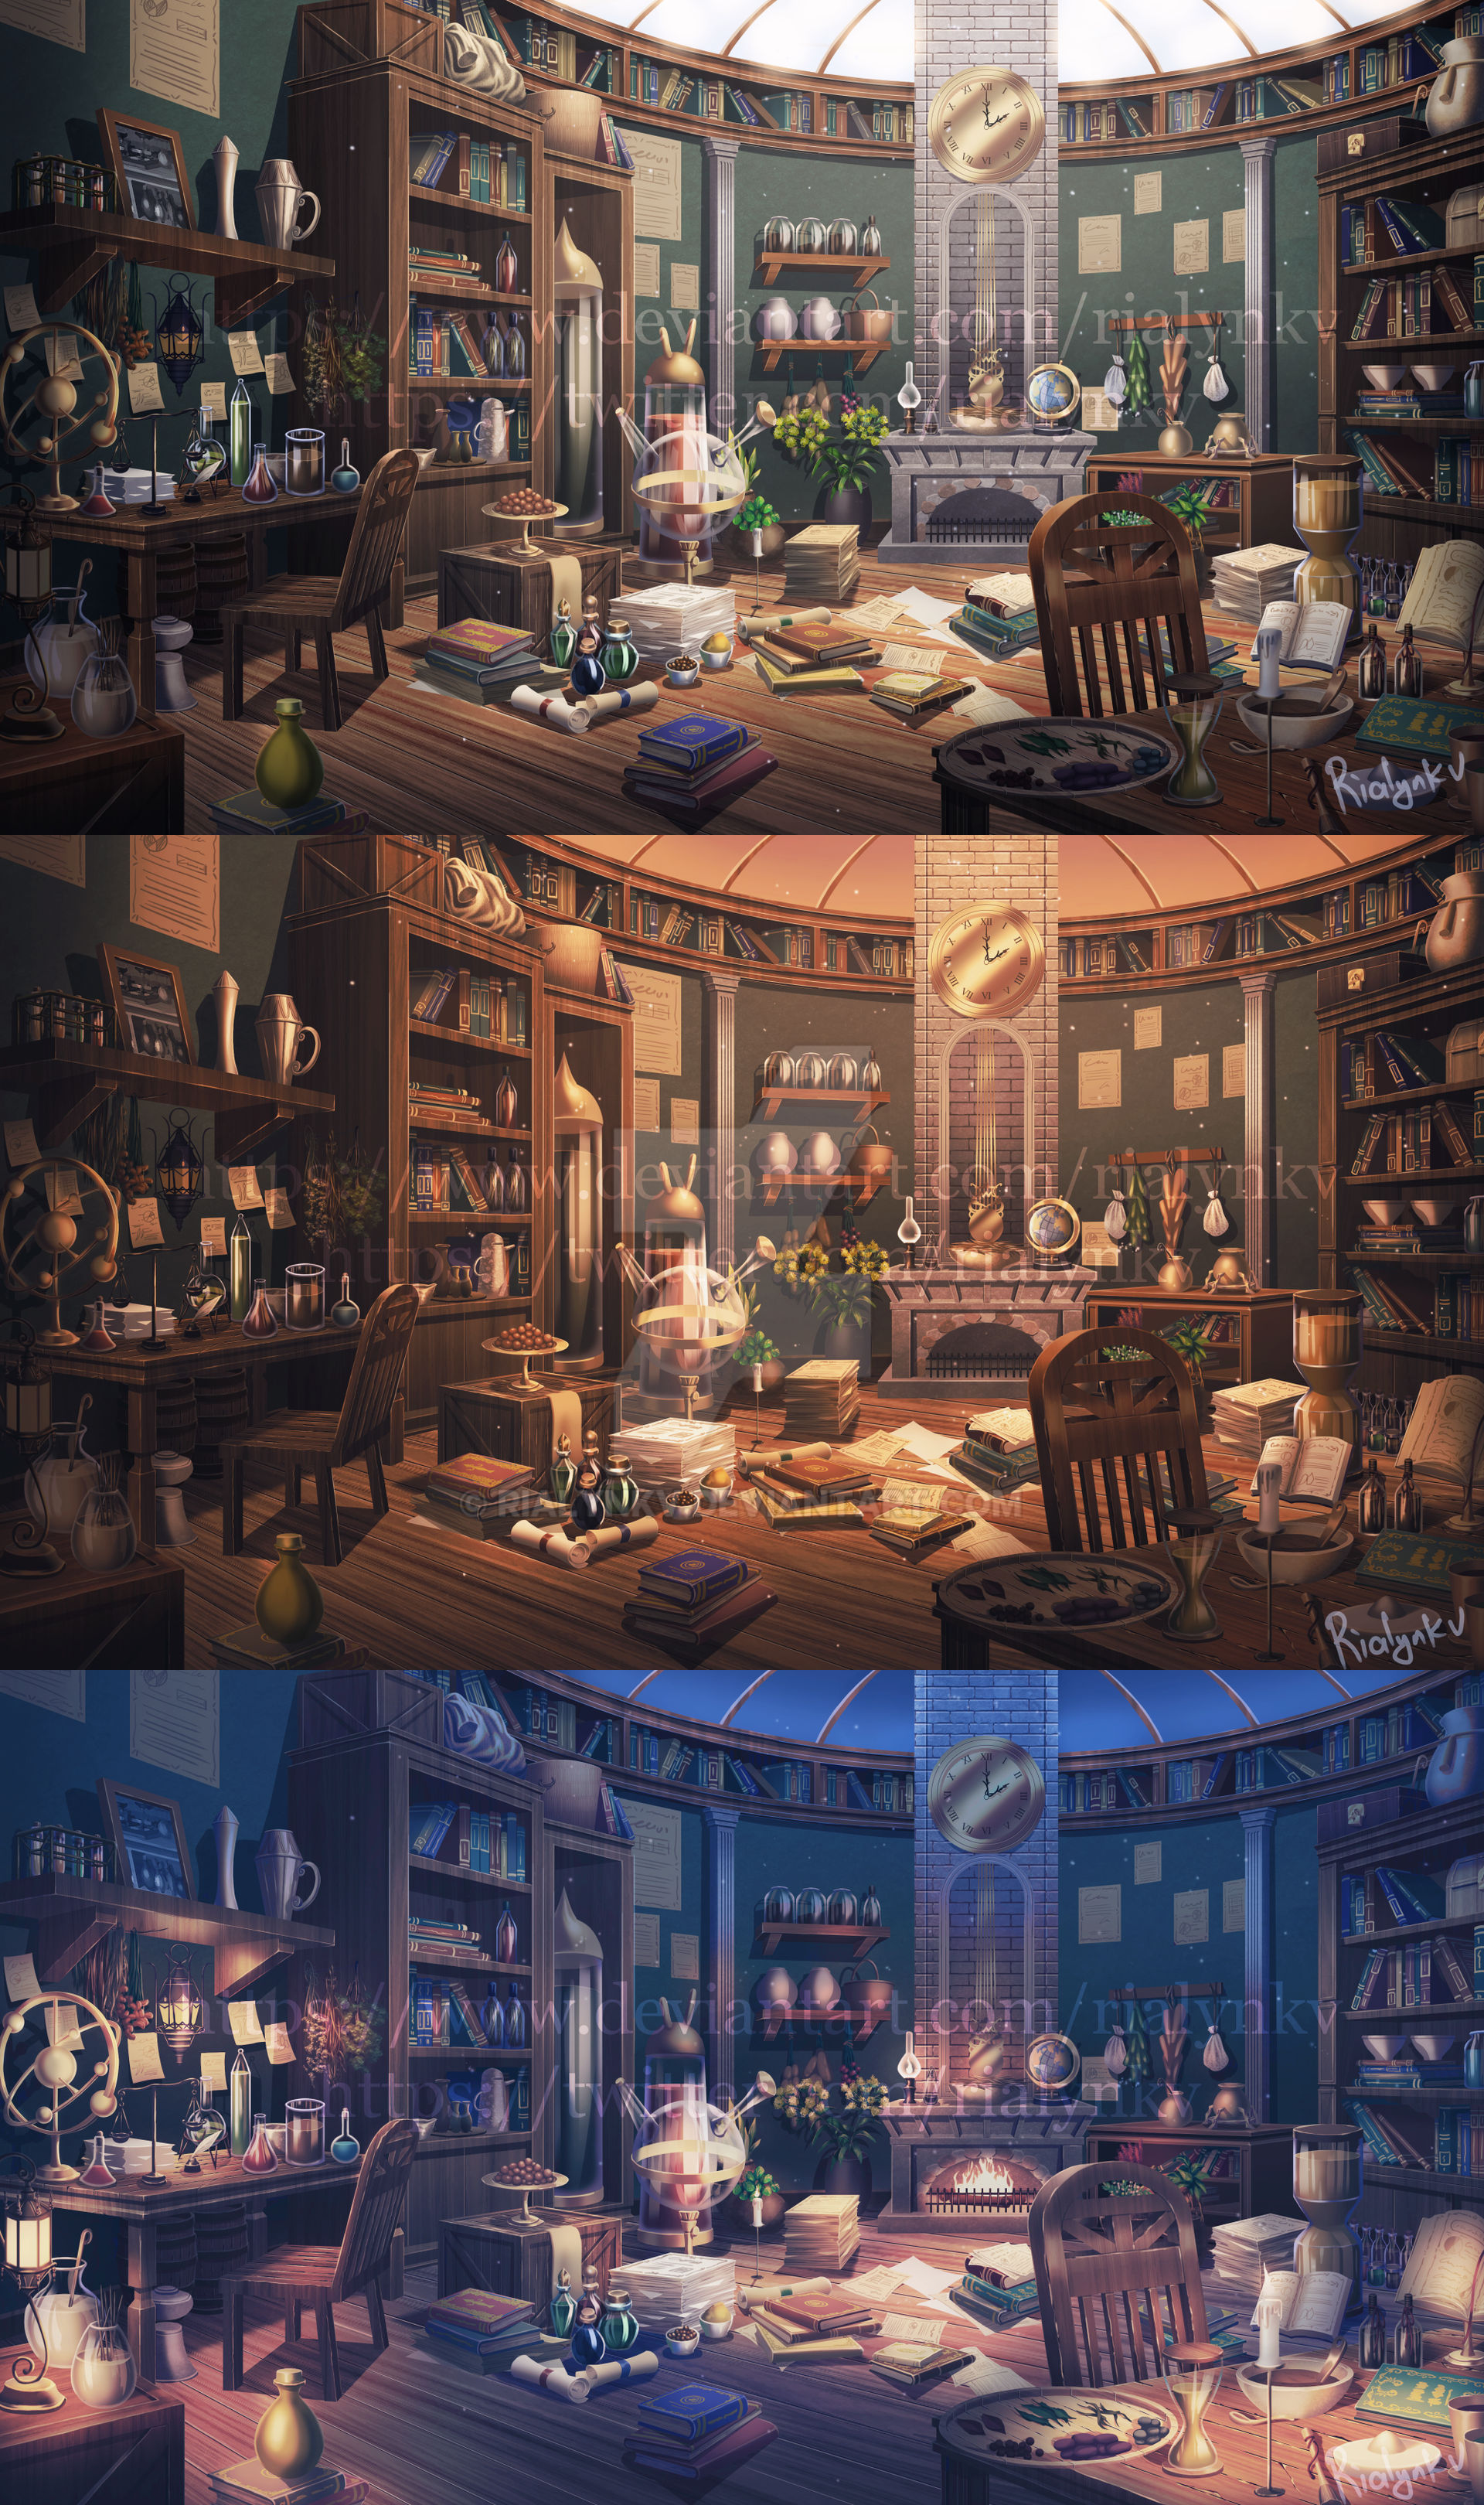 Library/Apothecary by rialynkv on DeviantArt